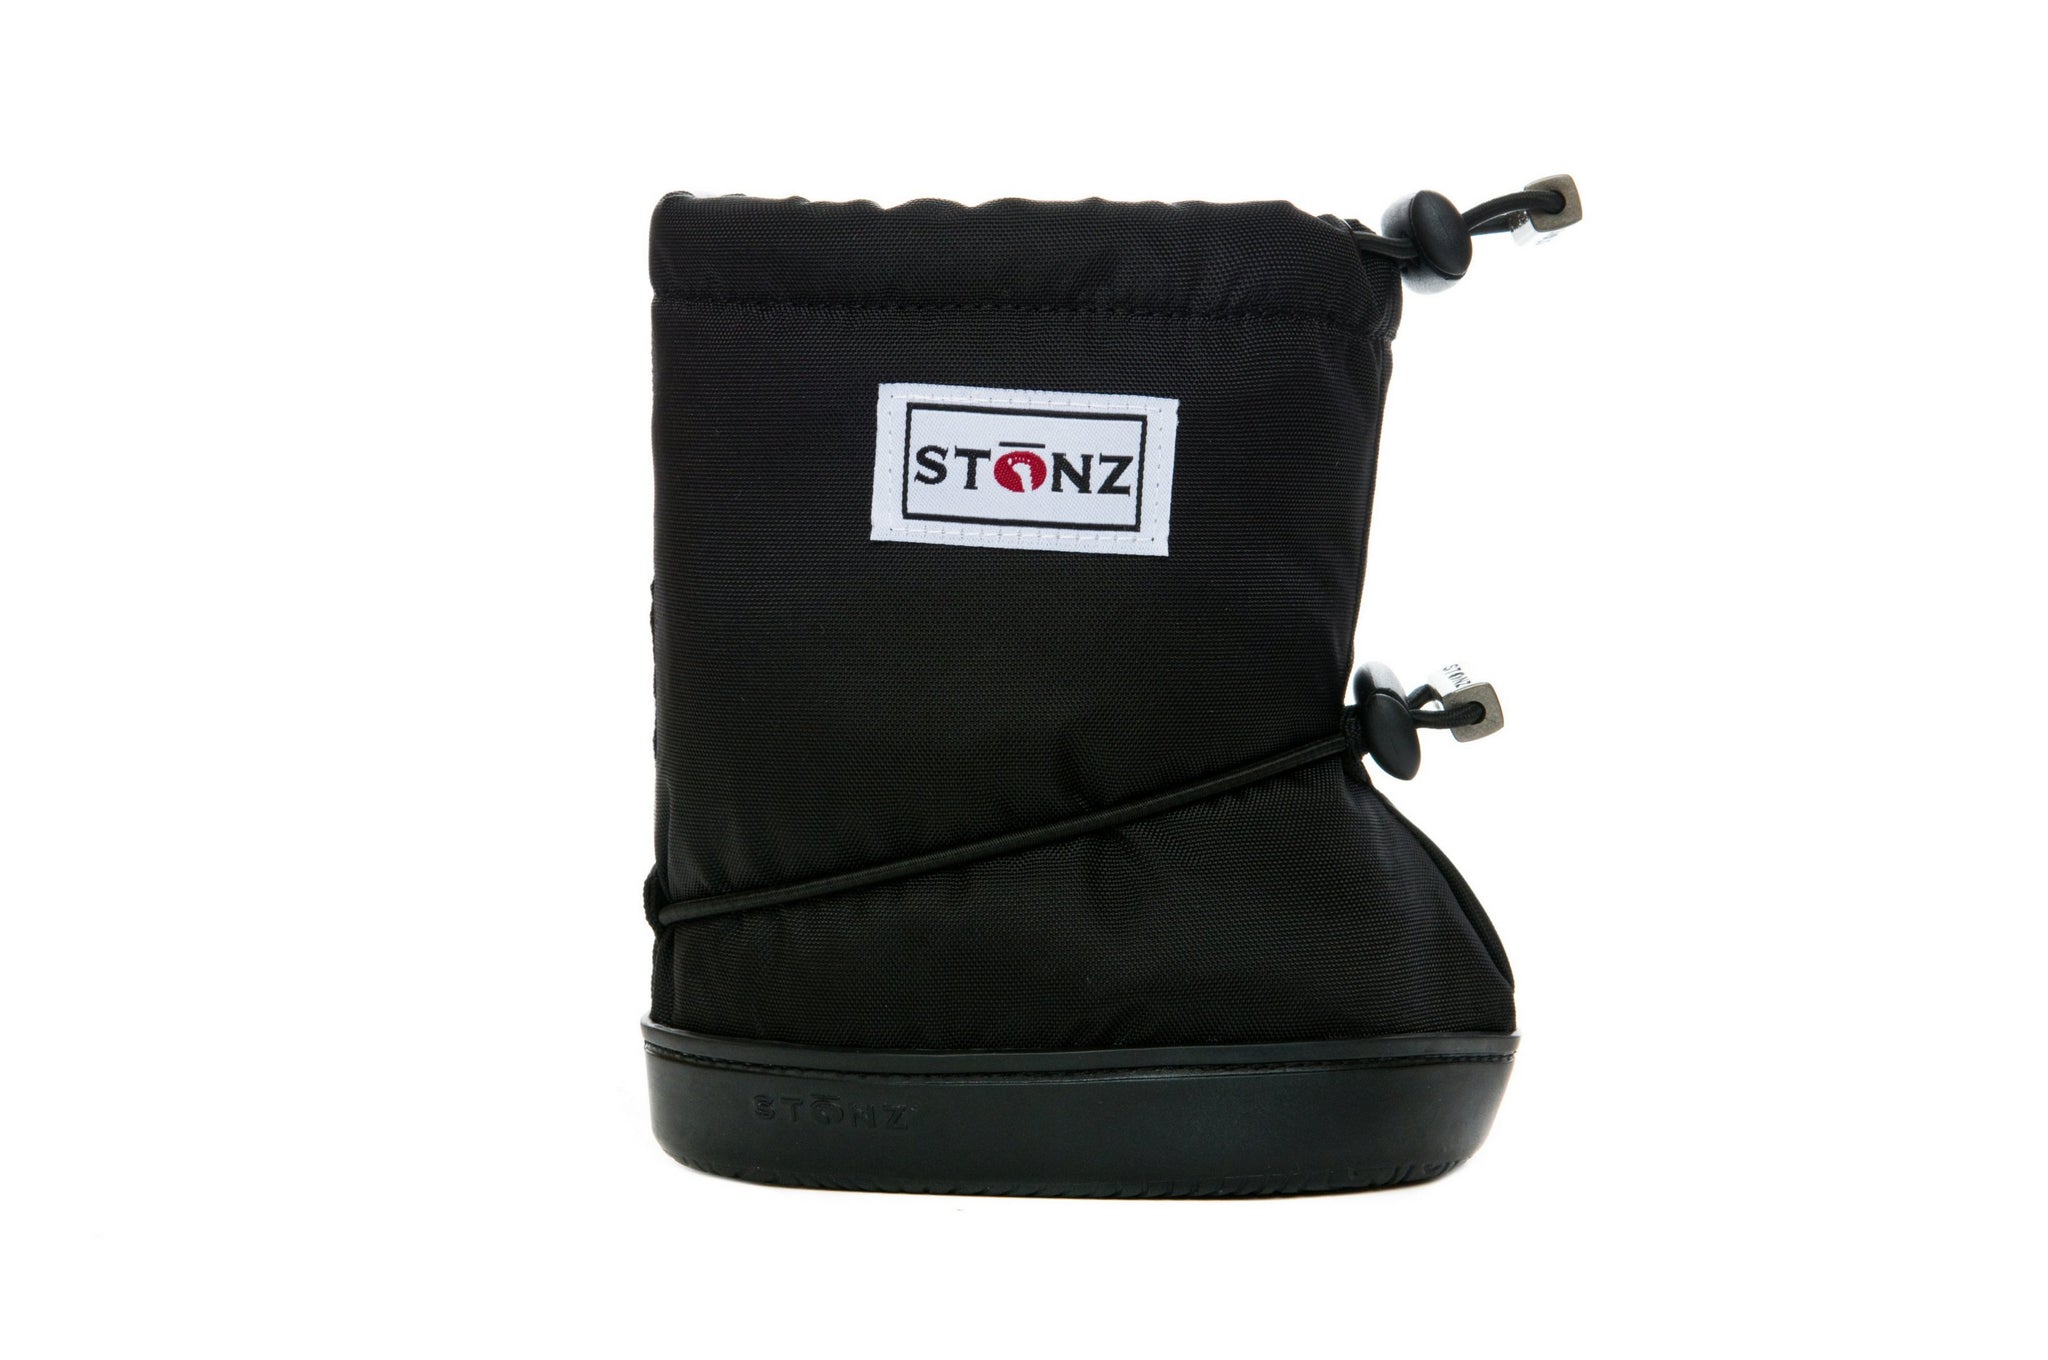 Toddler Booties - Black - Front View - Weather-resistant Boots for Children - Stonz